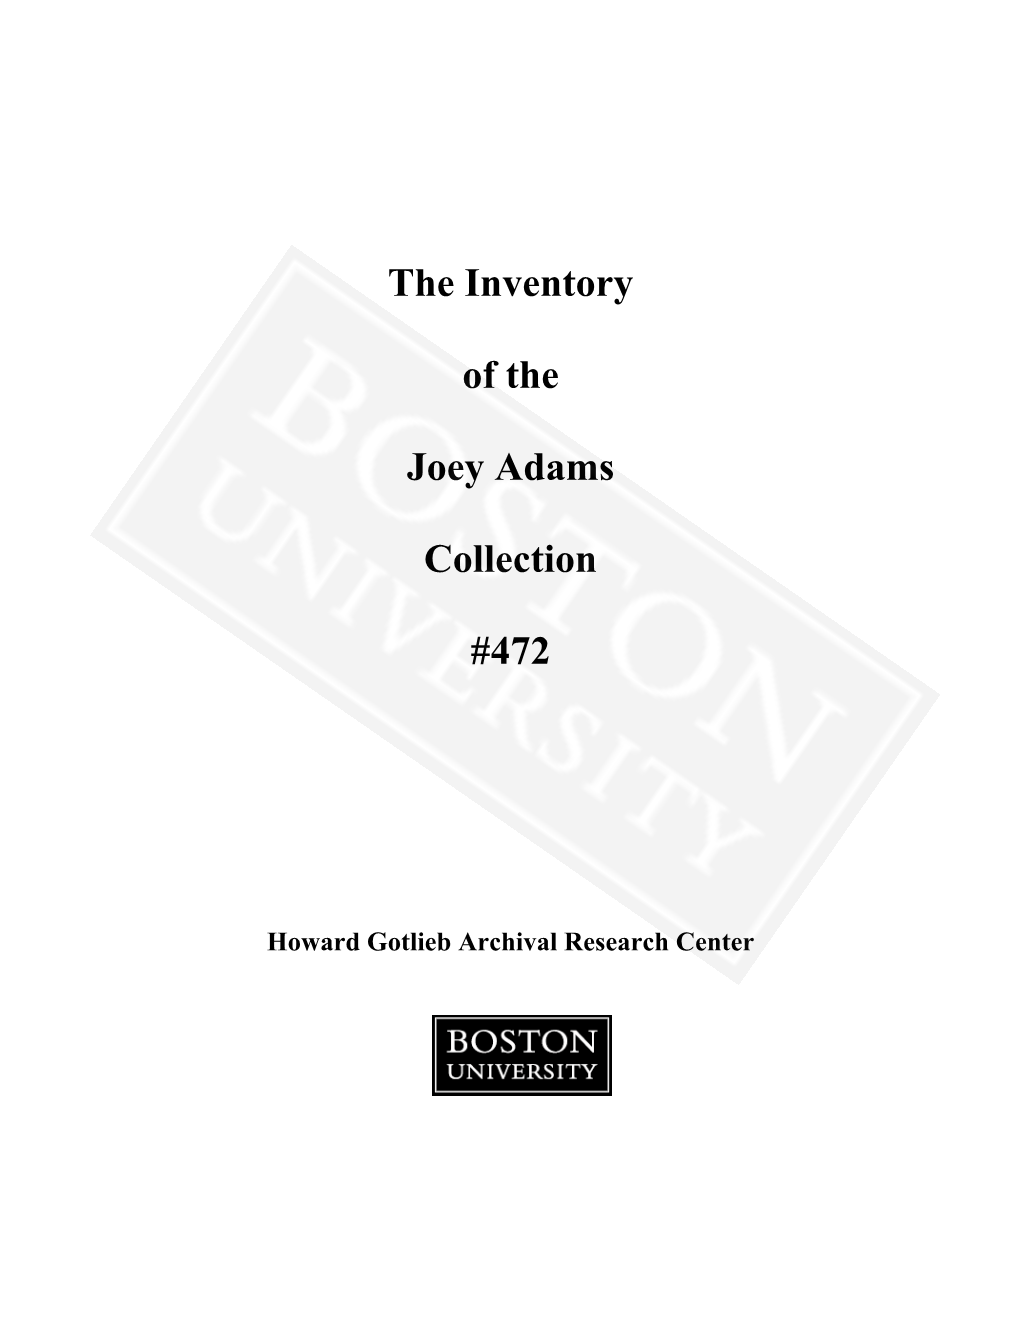 The Inventory of the Joey Adams Collection #472